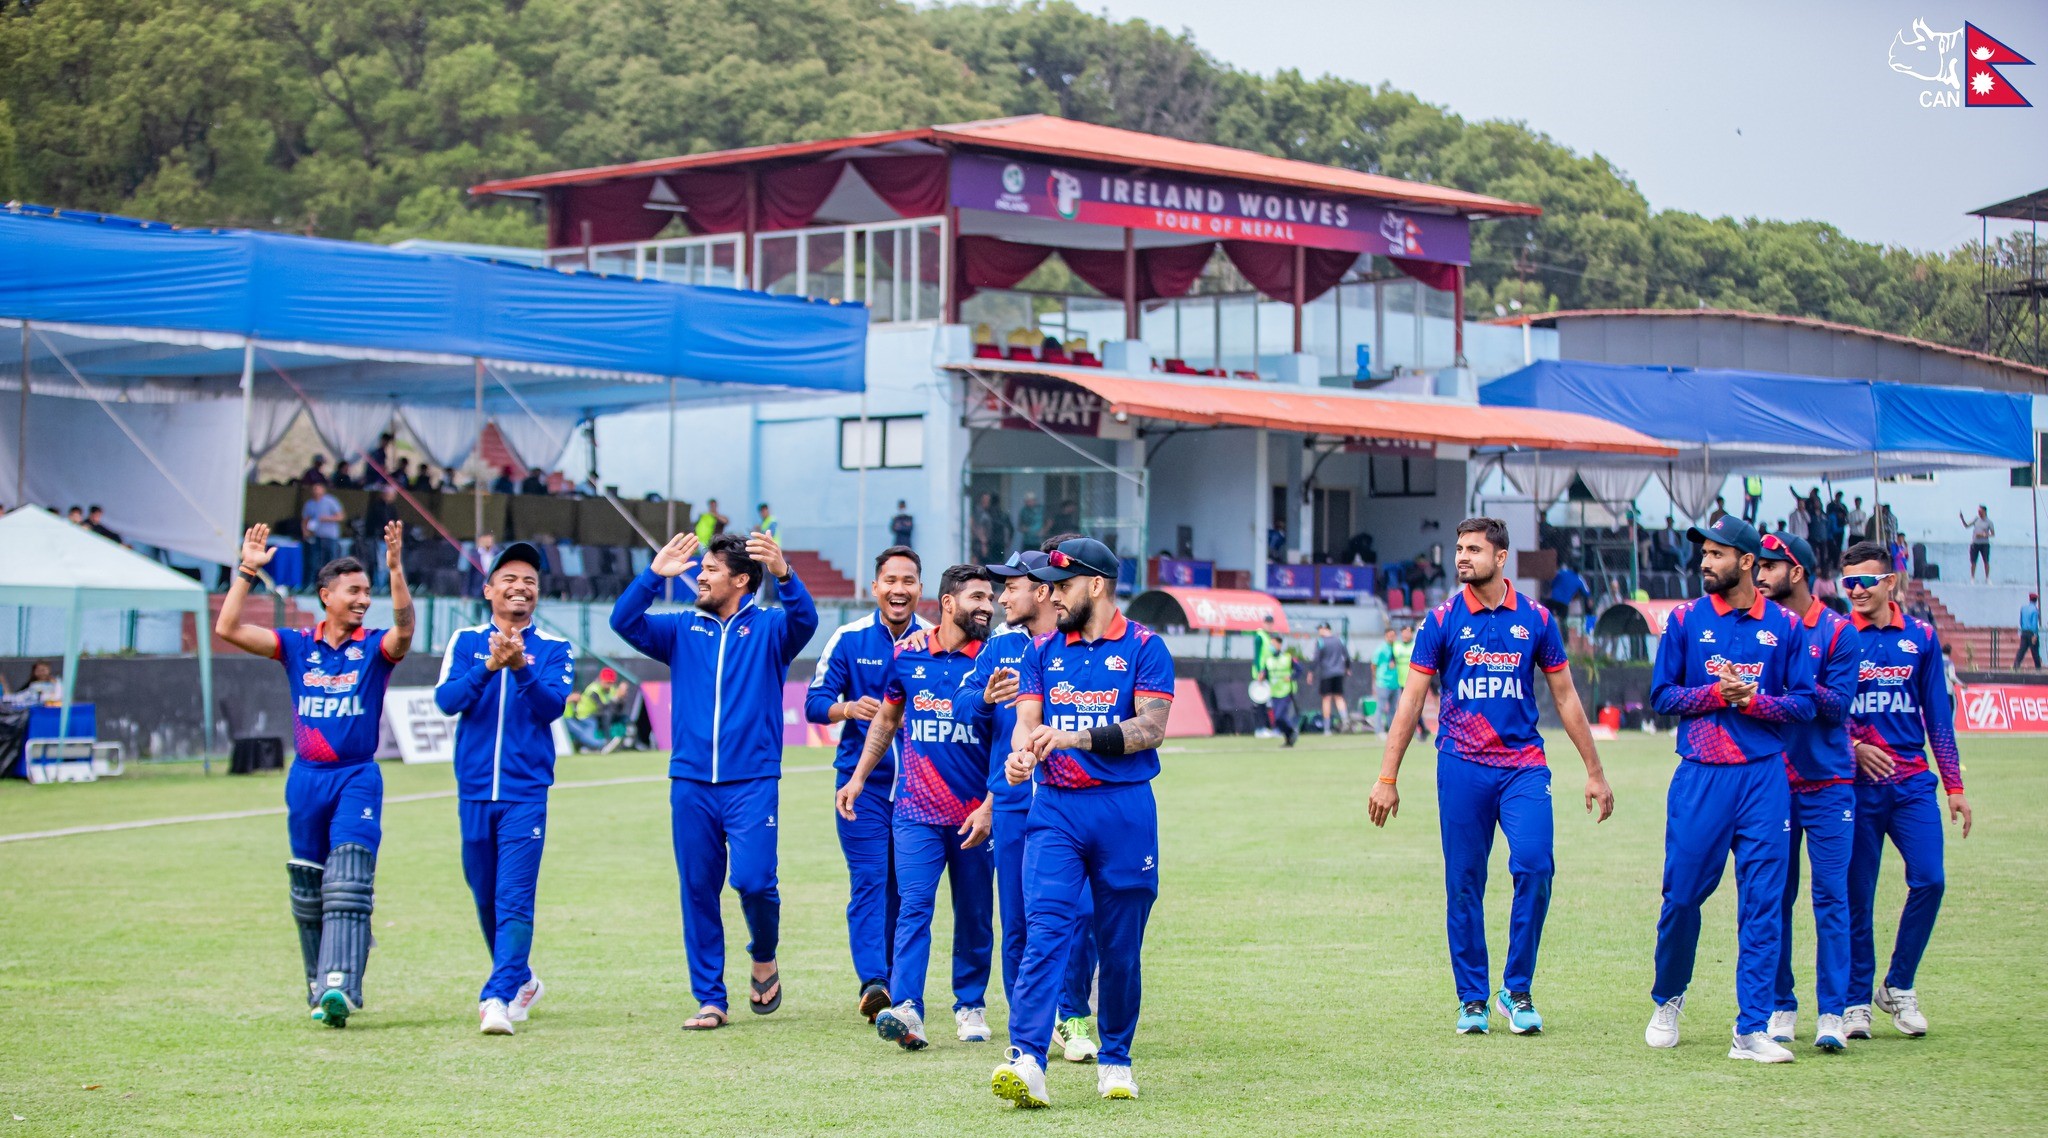 Nepal to face Ireland today following monday victory